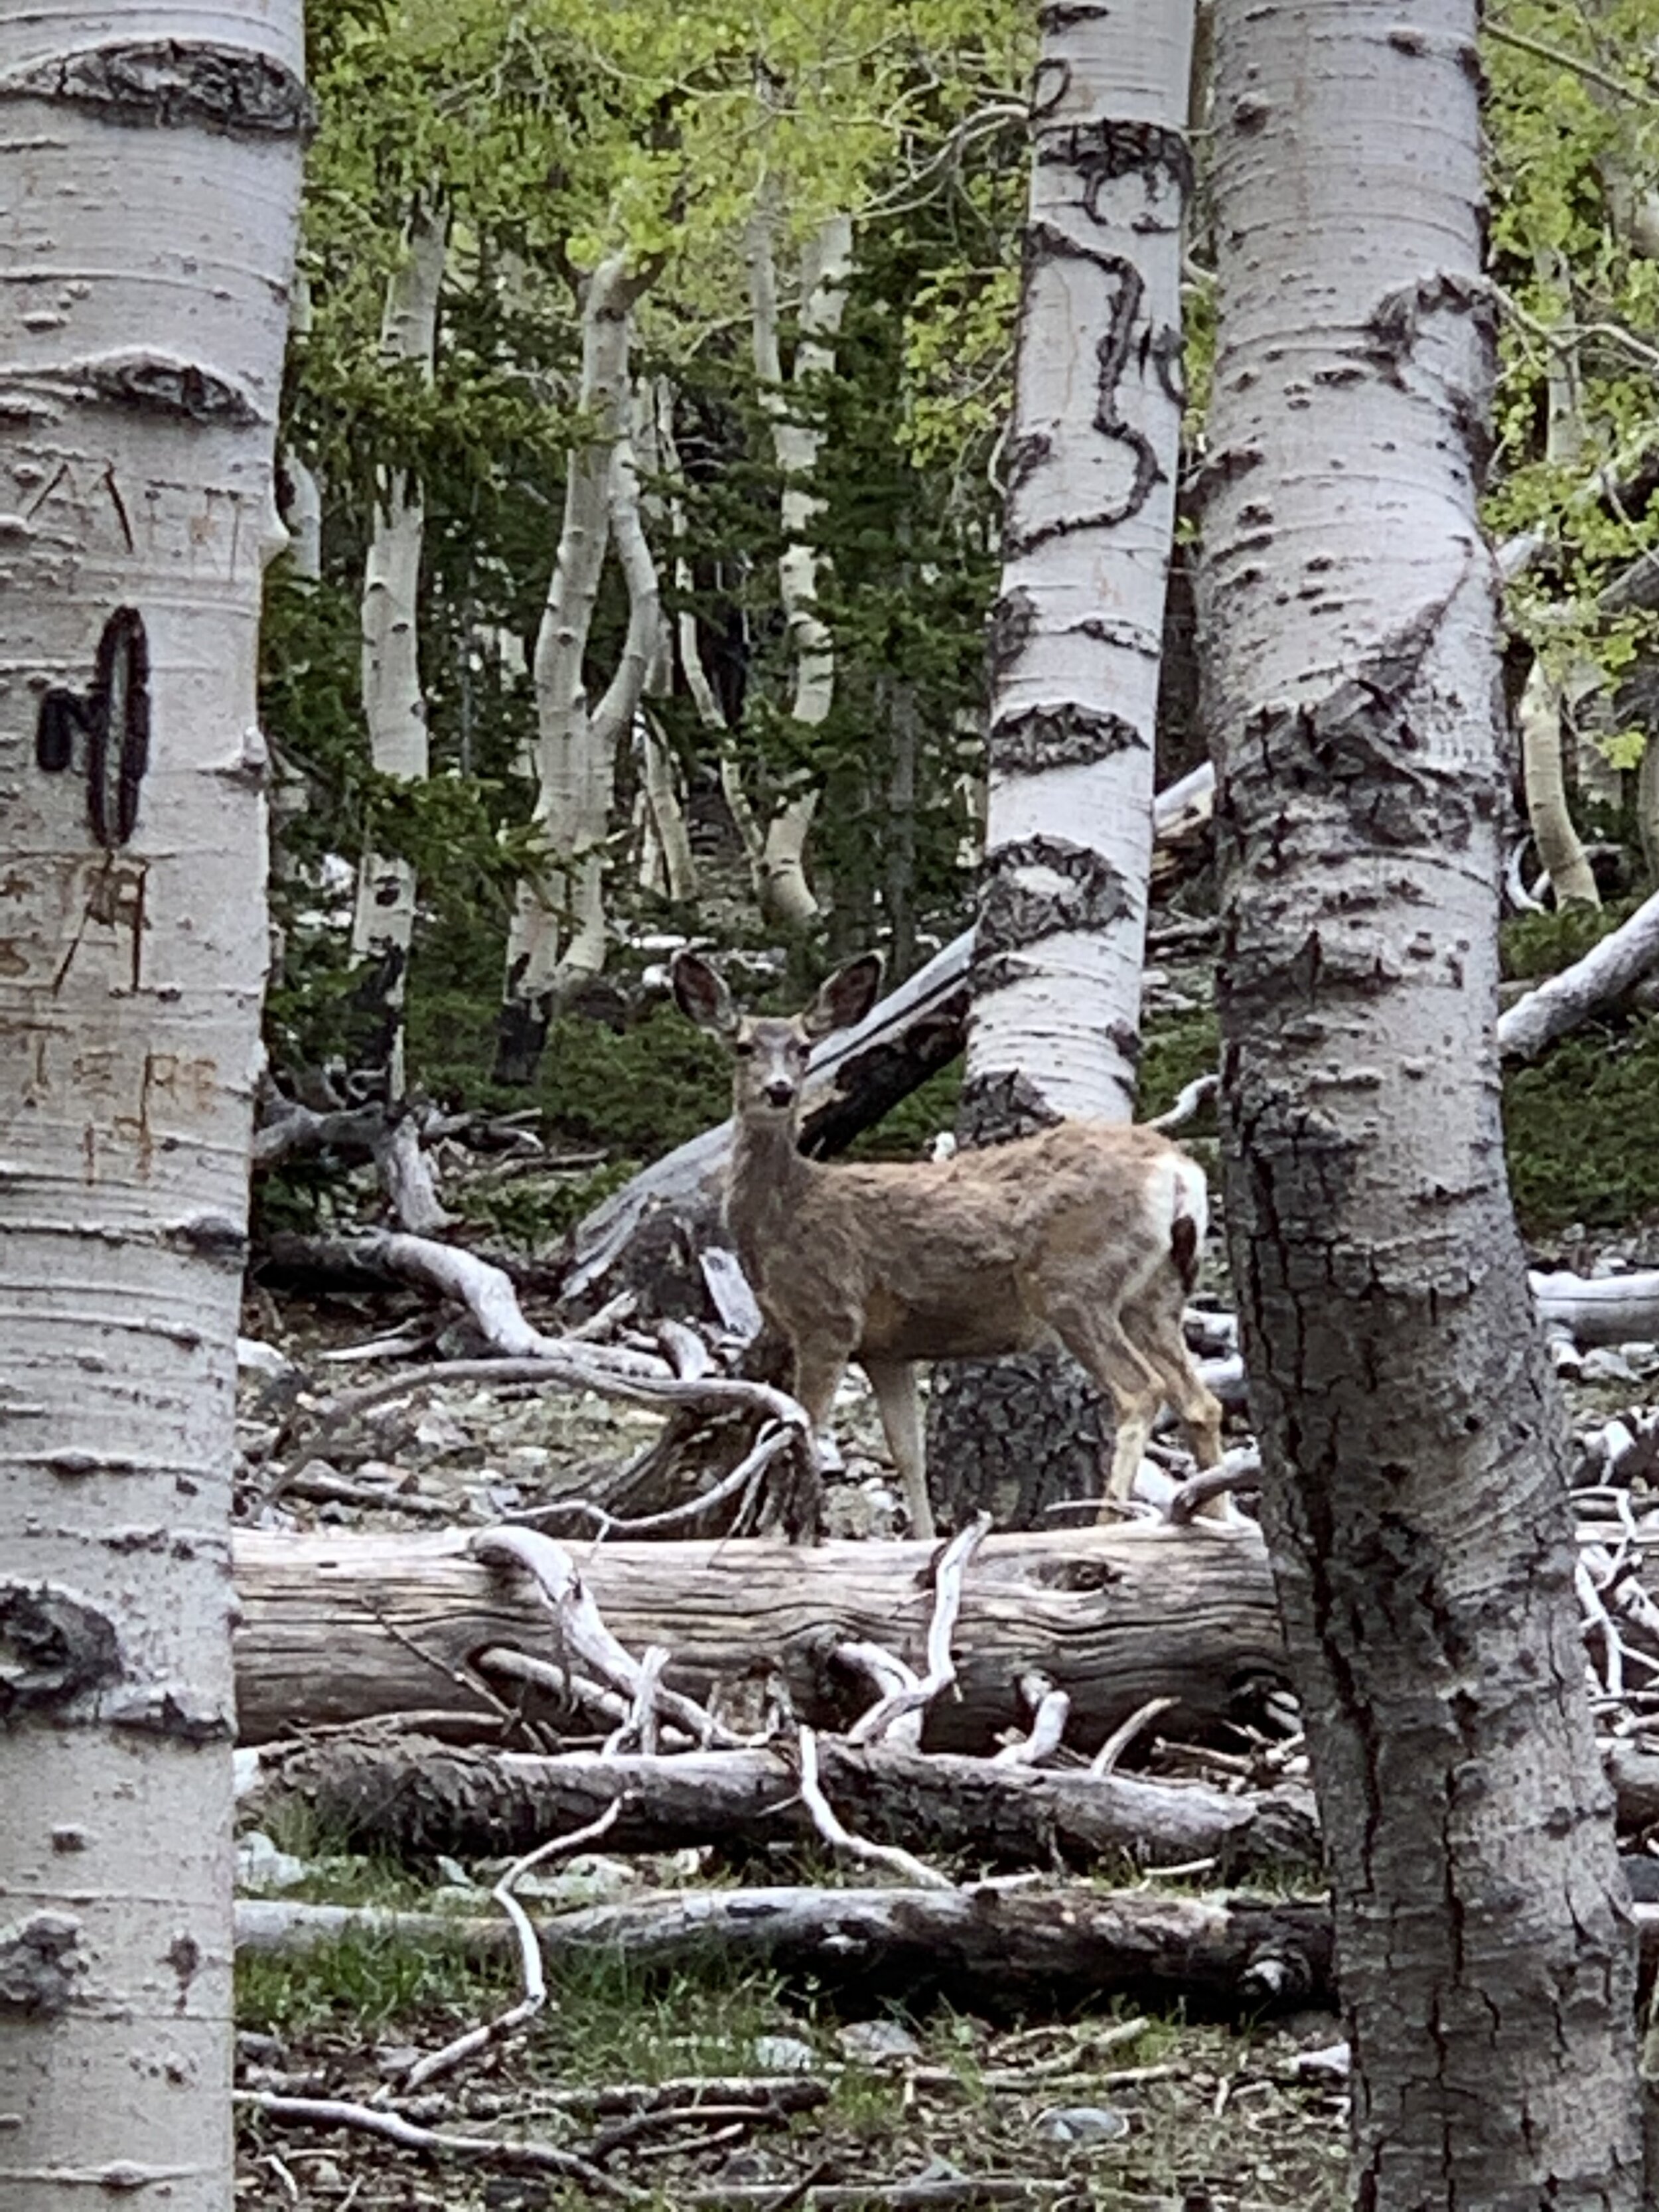  This mule deer was calm and grazed not too far away as I videotaped her. Mule deer are given their name because of their over-sized ears and are also distinct because of their white rump patch and black-tipped tails. 